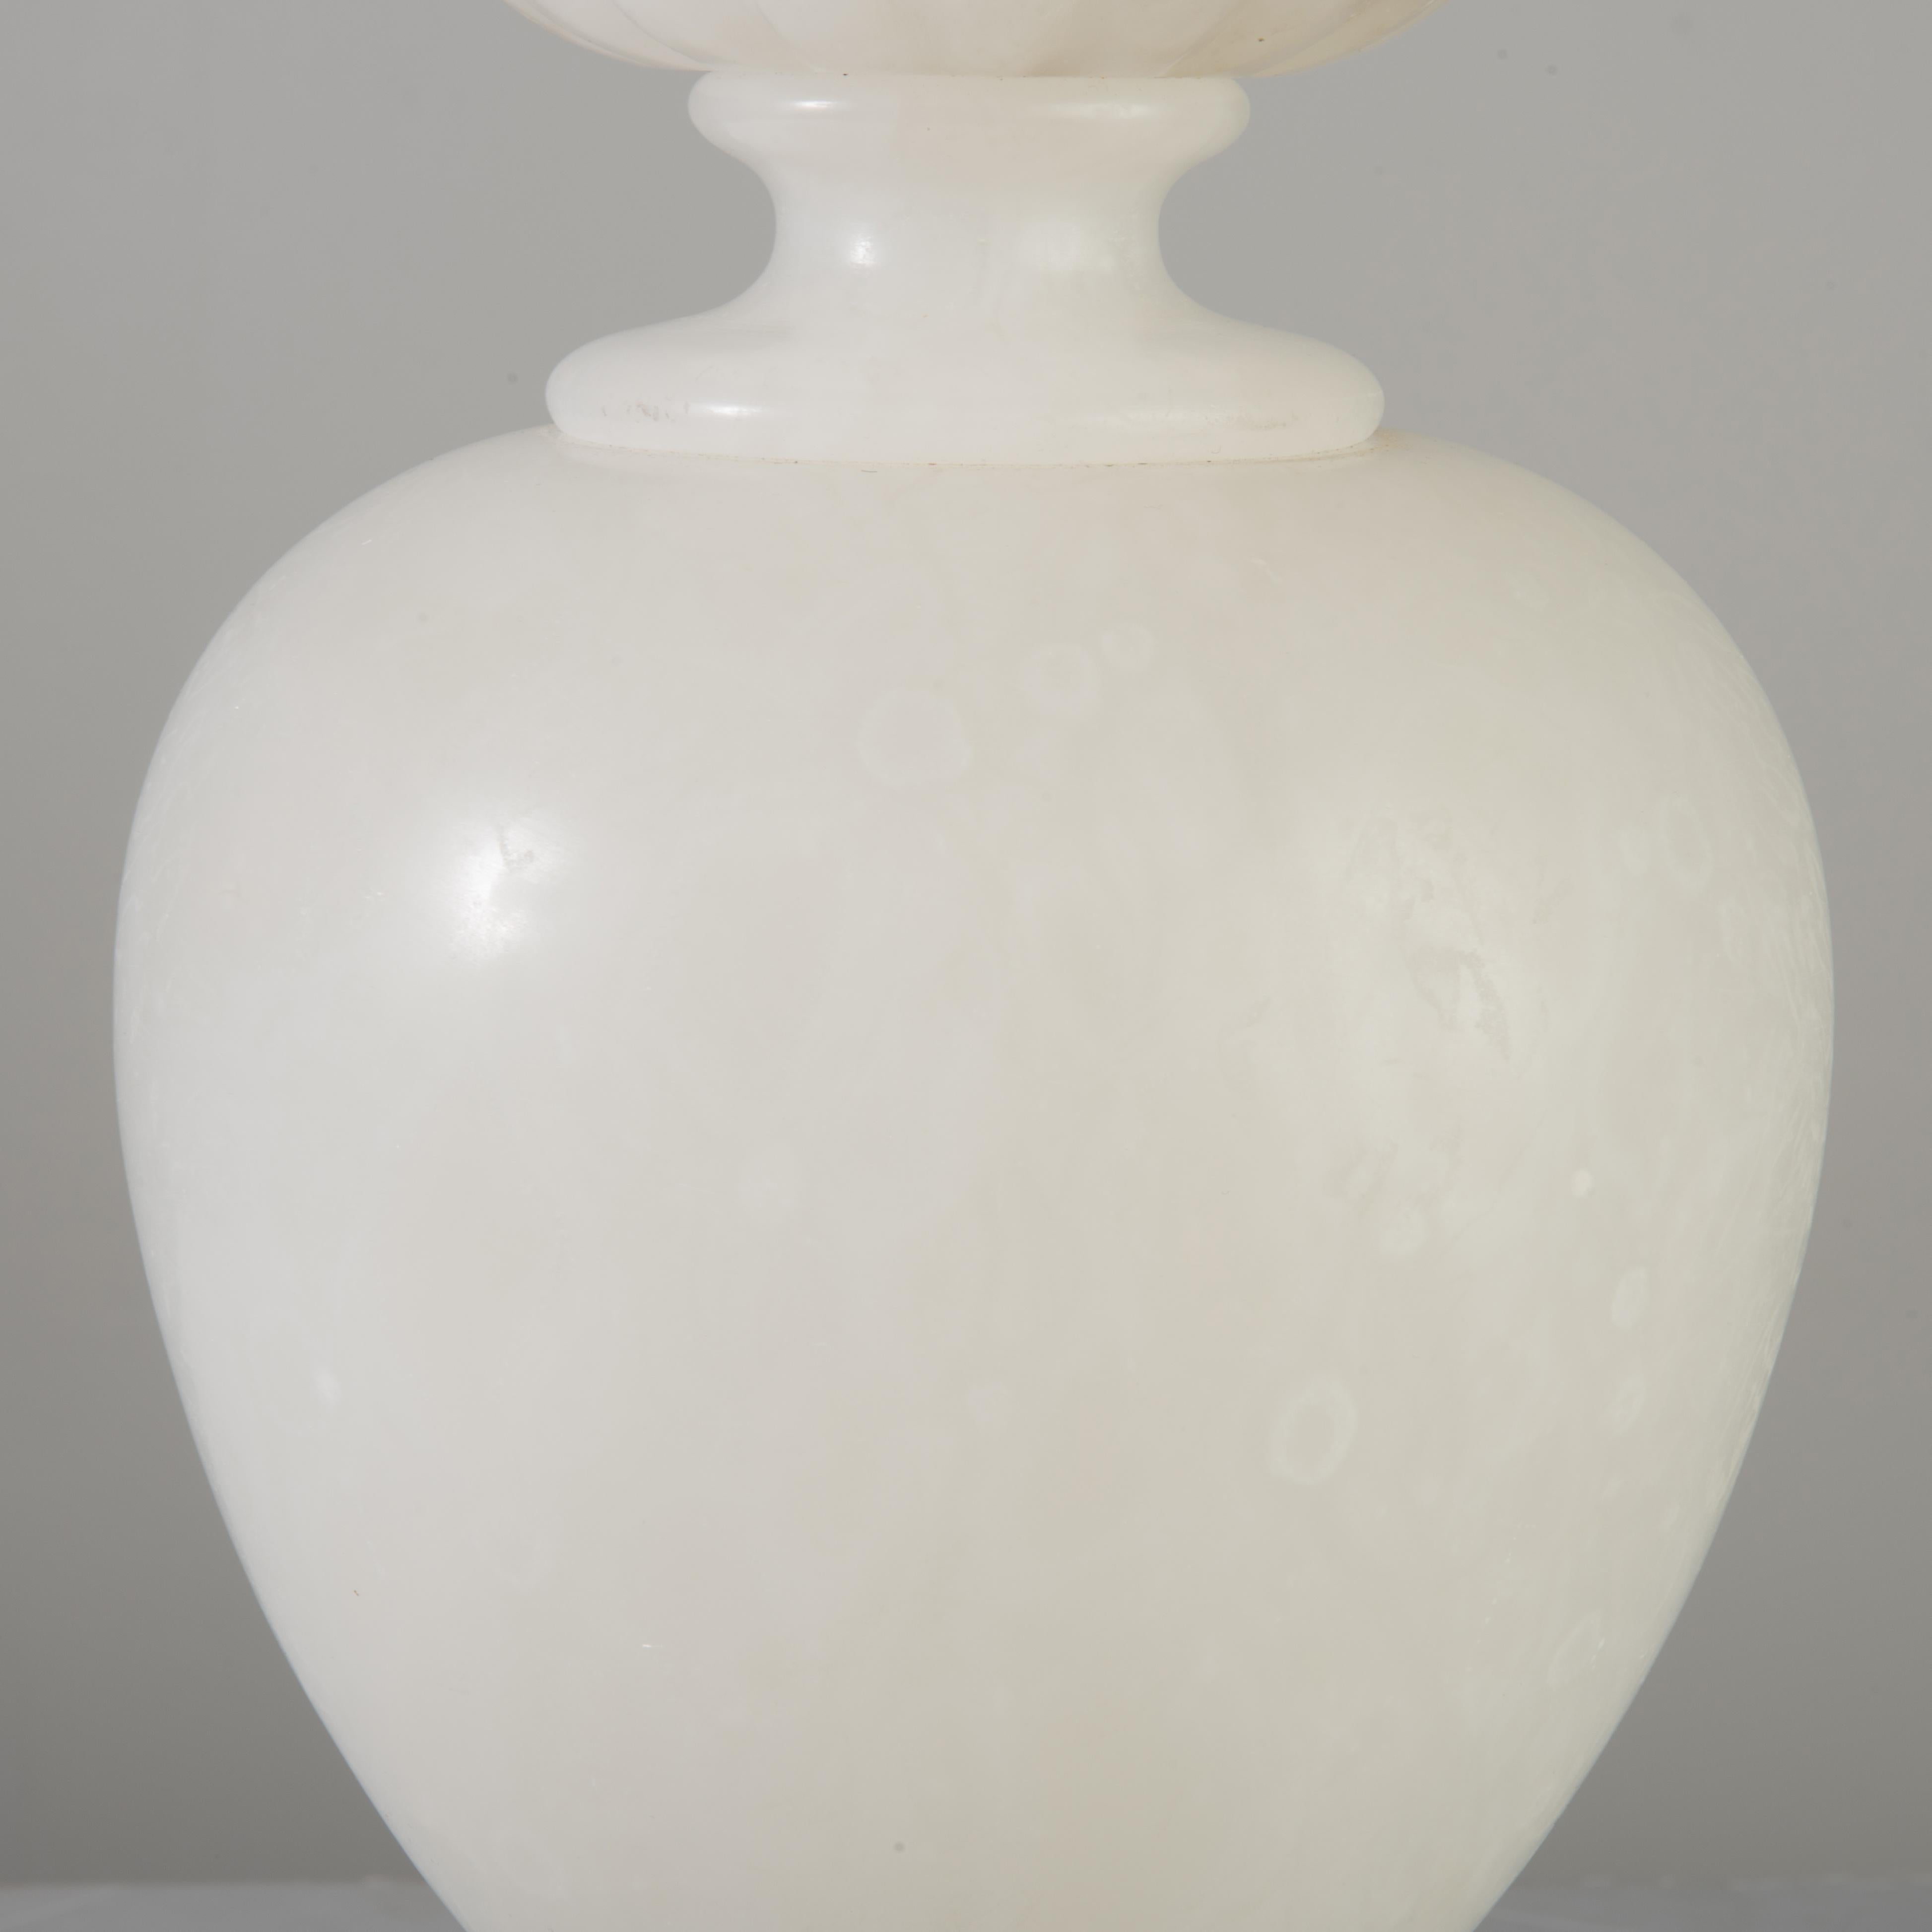 1950s Italian Neoclassical Alabaster Vase Urn Baluster Marbro Style Lamp For Sale 5